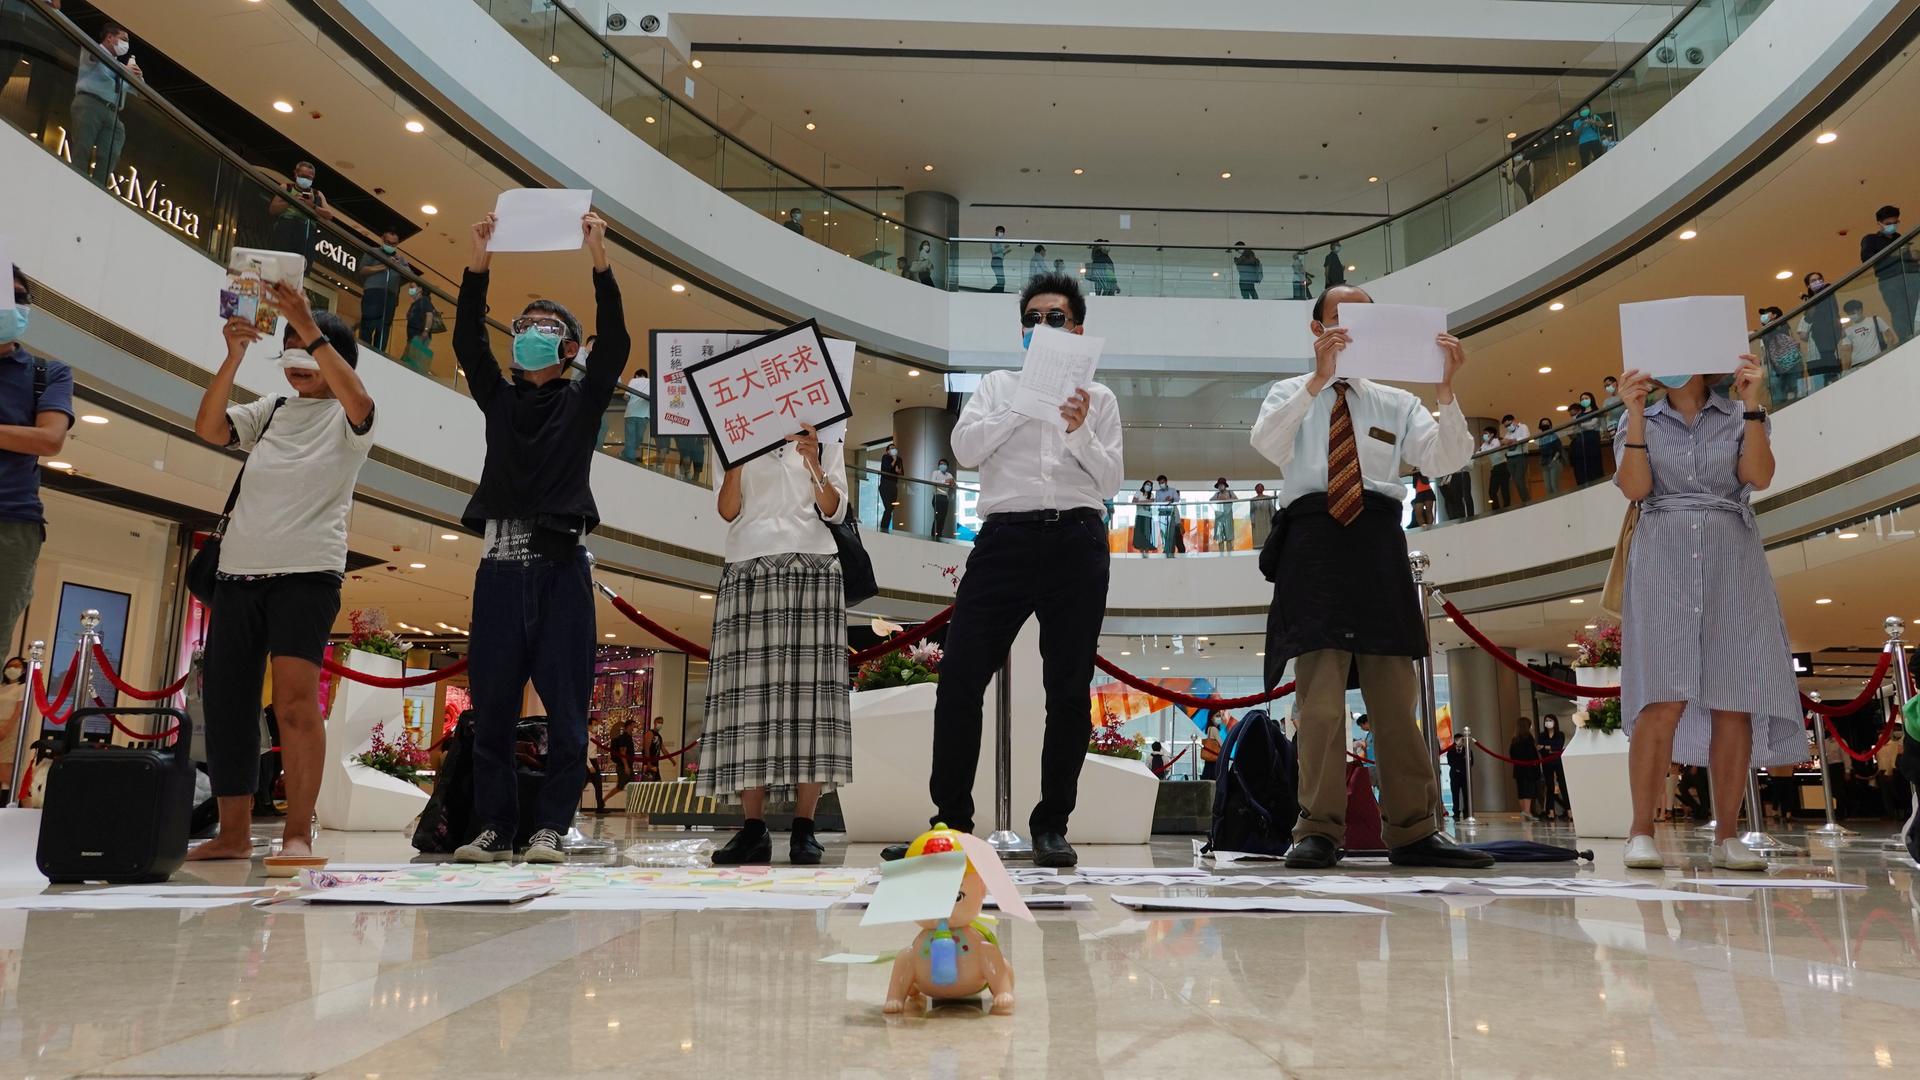 Pro-democracy demonstrators take part in a lunchtime protest against the national security law, at a shopping mall in Hong Kong, July 6, 2020. 